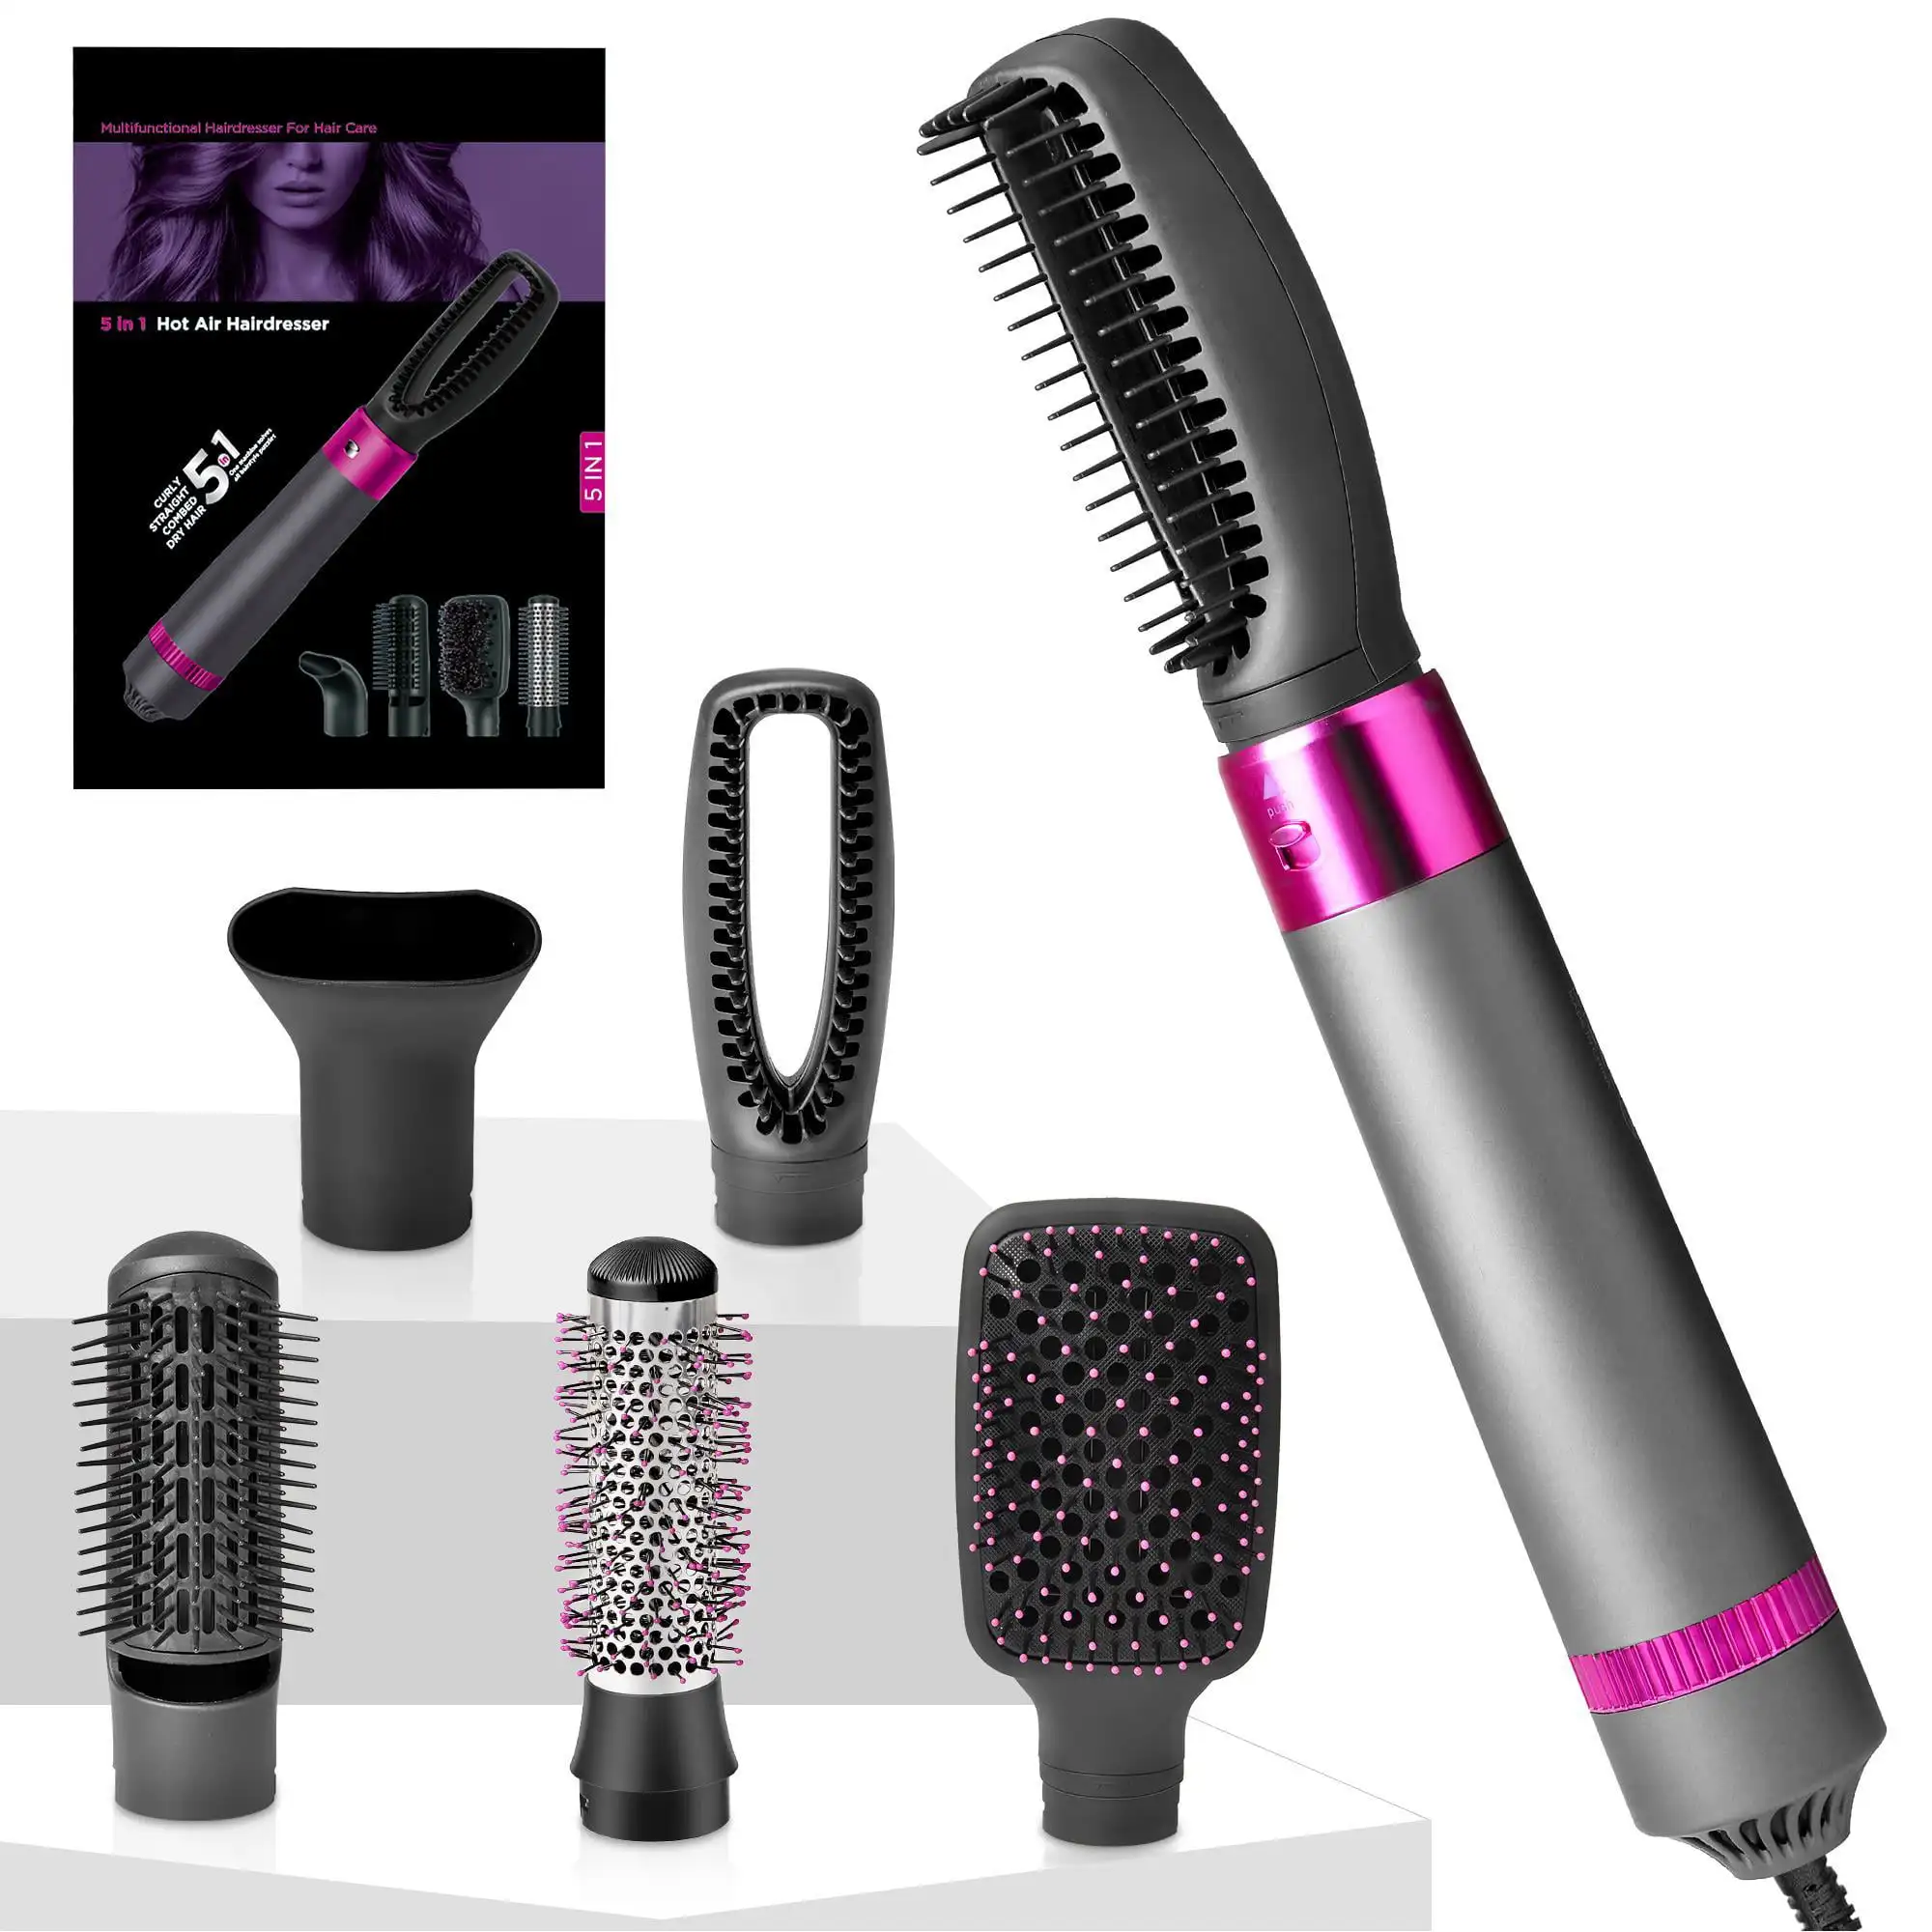 

Delivery within 7-10 daysHair Dryer Brush, 5 in 1 Detachable Hair Dryer and Volumizer Hot Air Brush, Negative Ionic Hot Air Kit